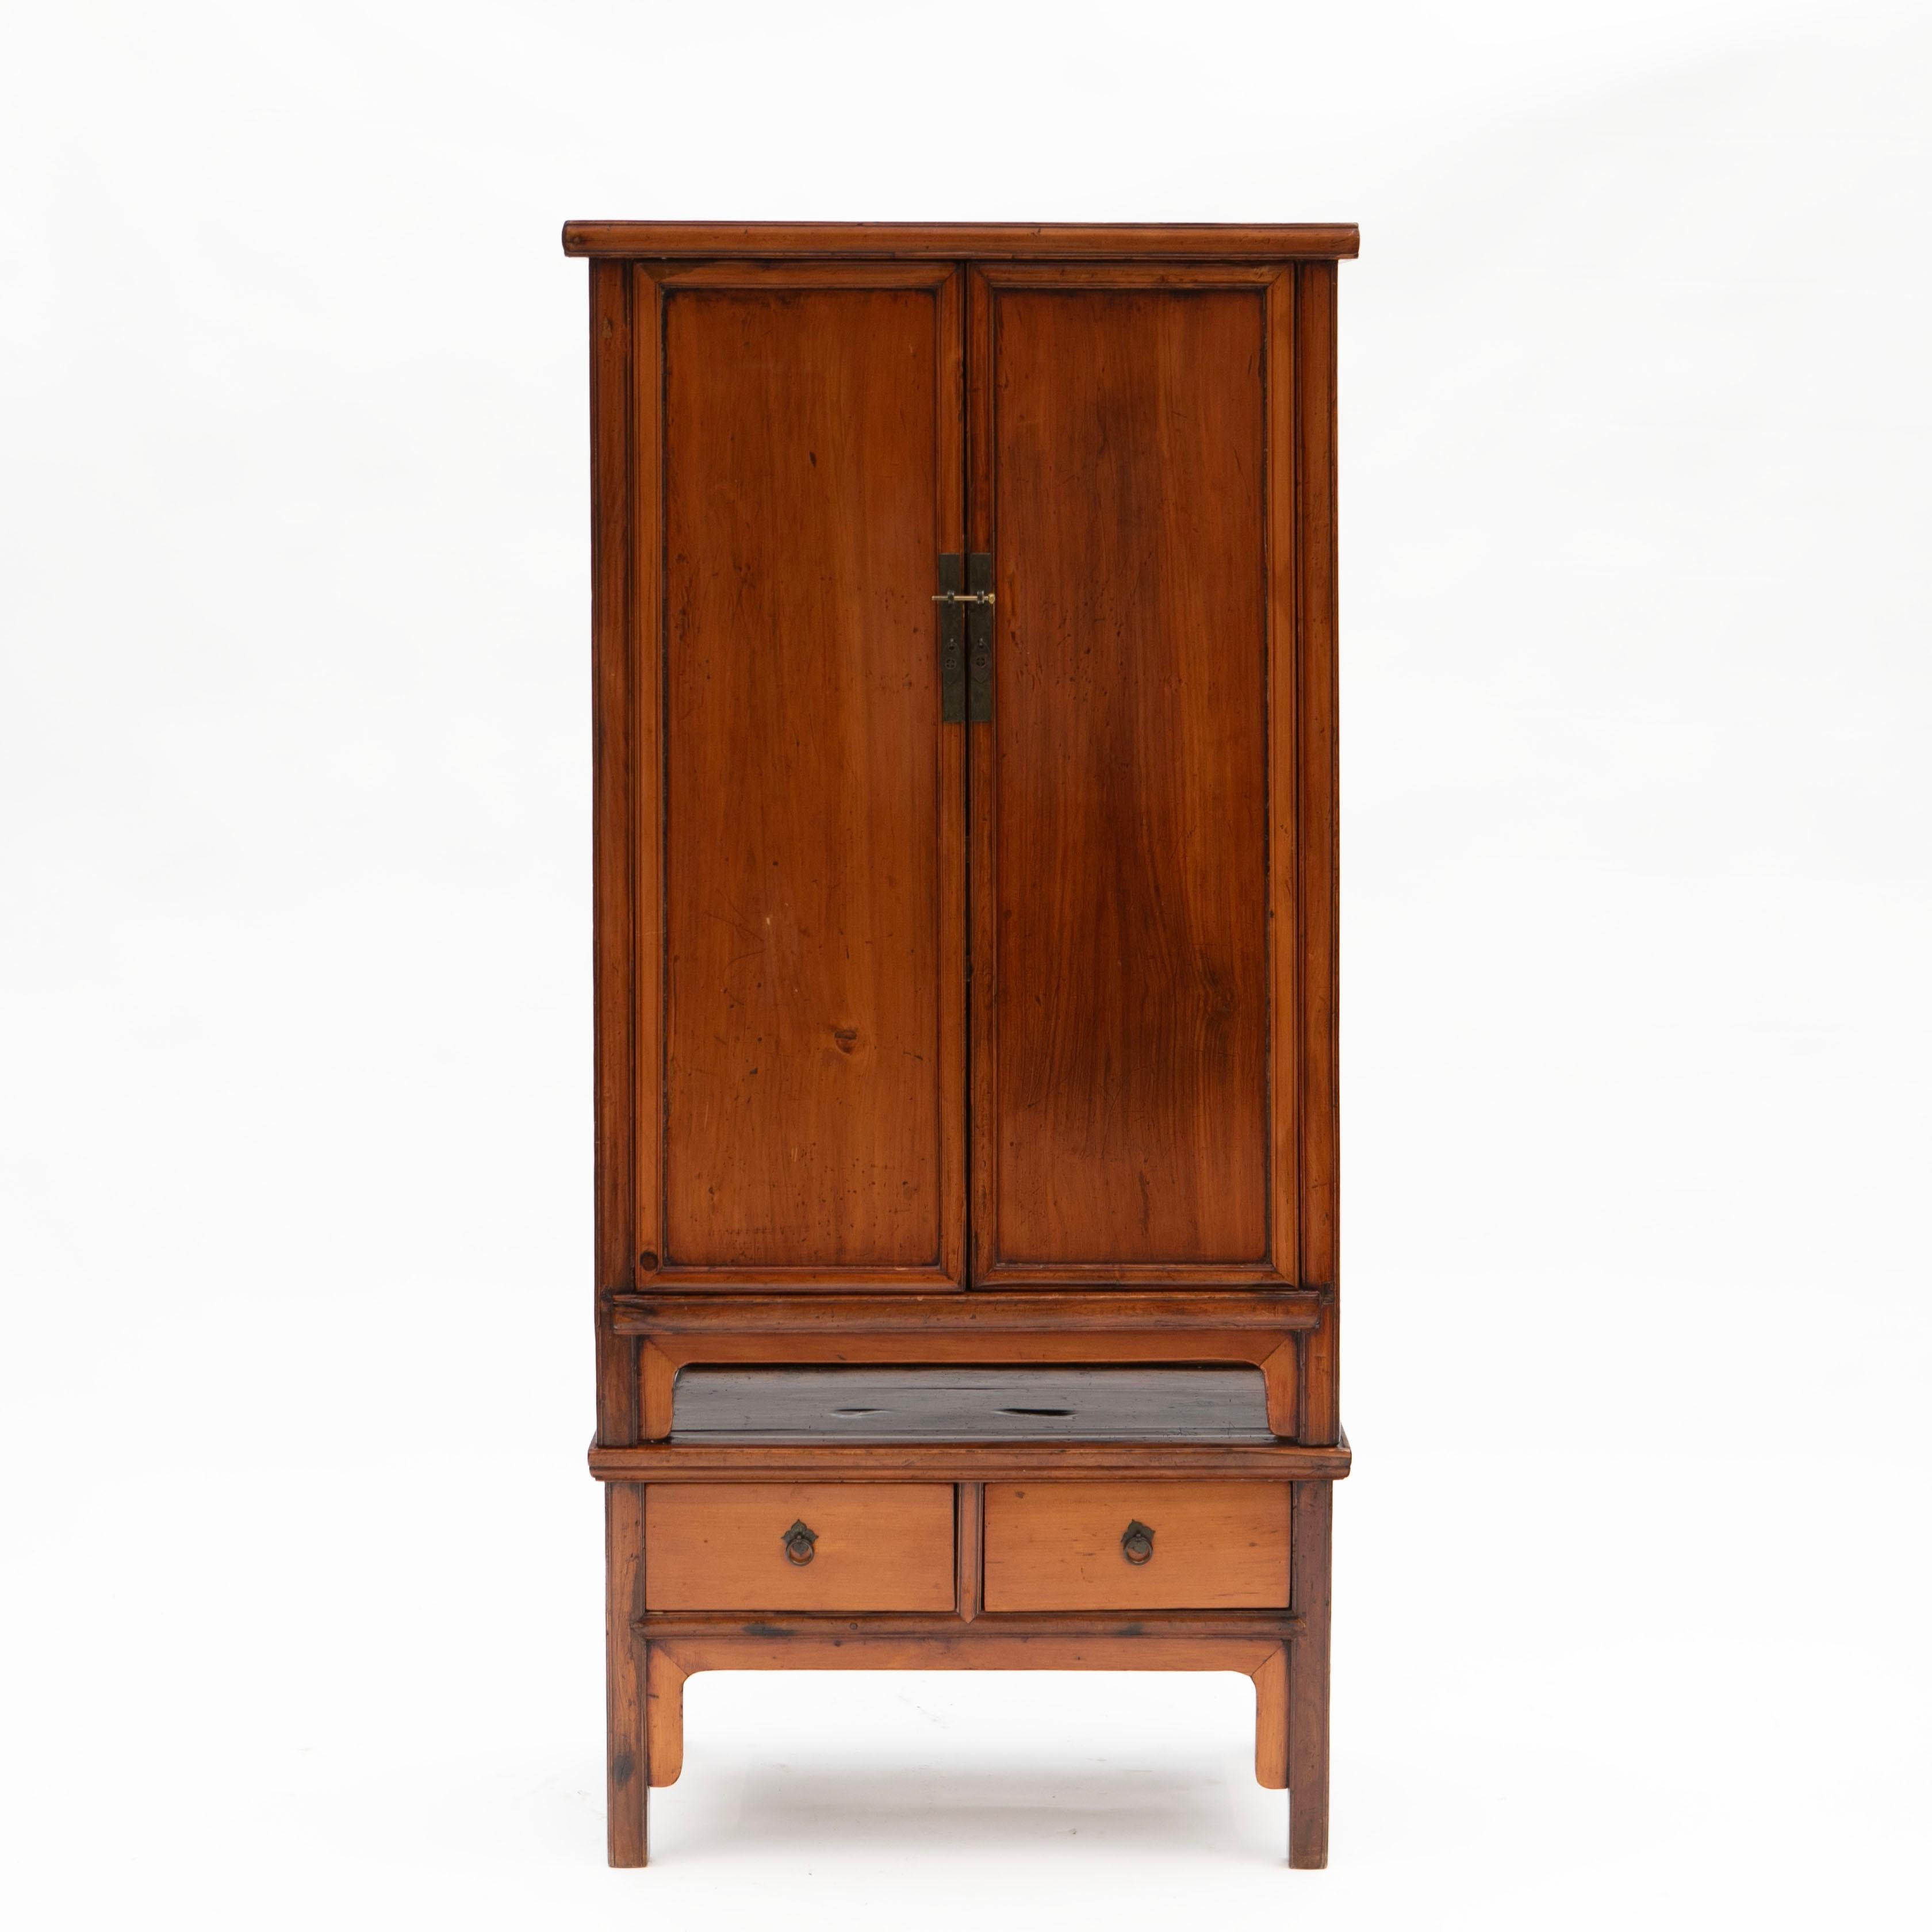 Elegant 19th century Ming style cabinet in crafted in peachwood.

The cabinet is divided into two parts: the upper section, equipped with a pair of doors featuring metal fittings, opens up to an interior of shelves and drawers.
The lower section has